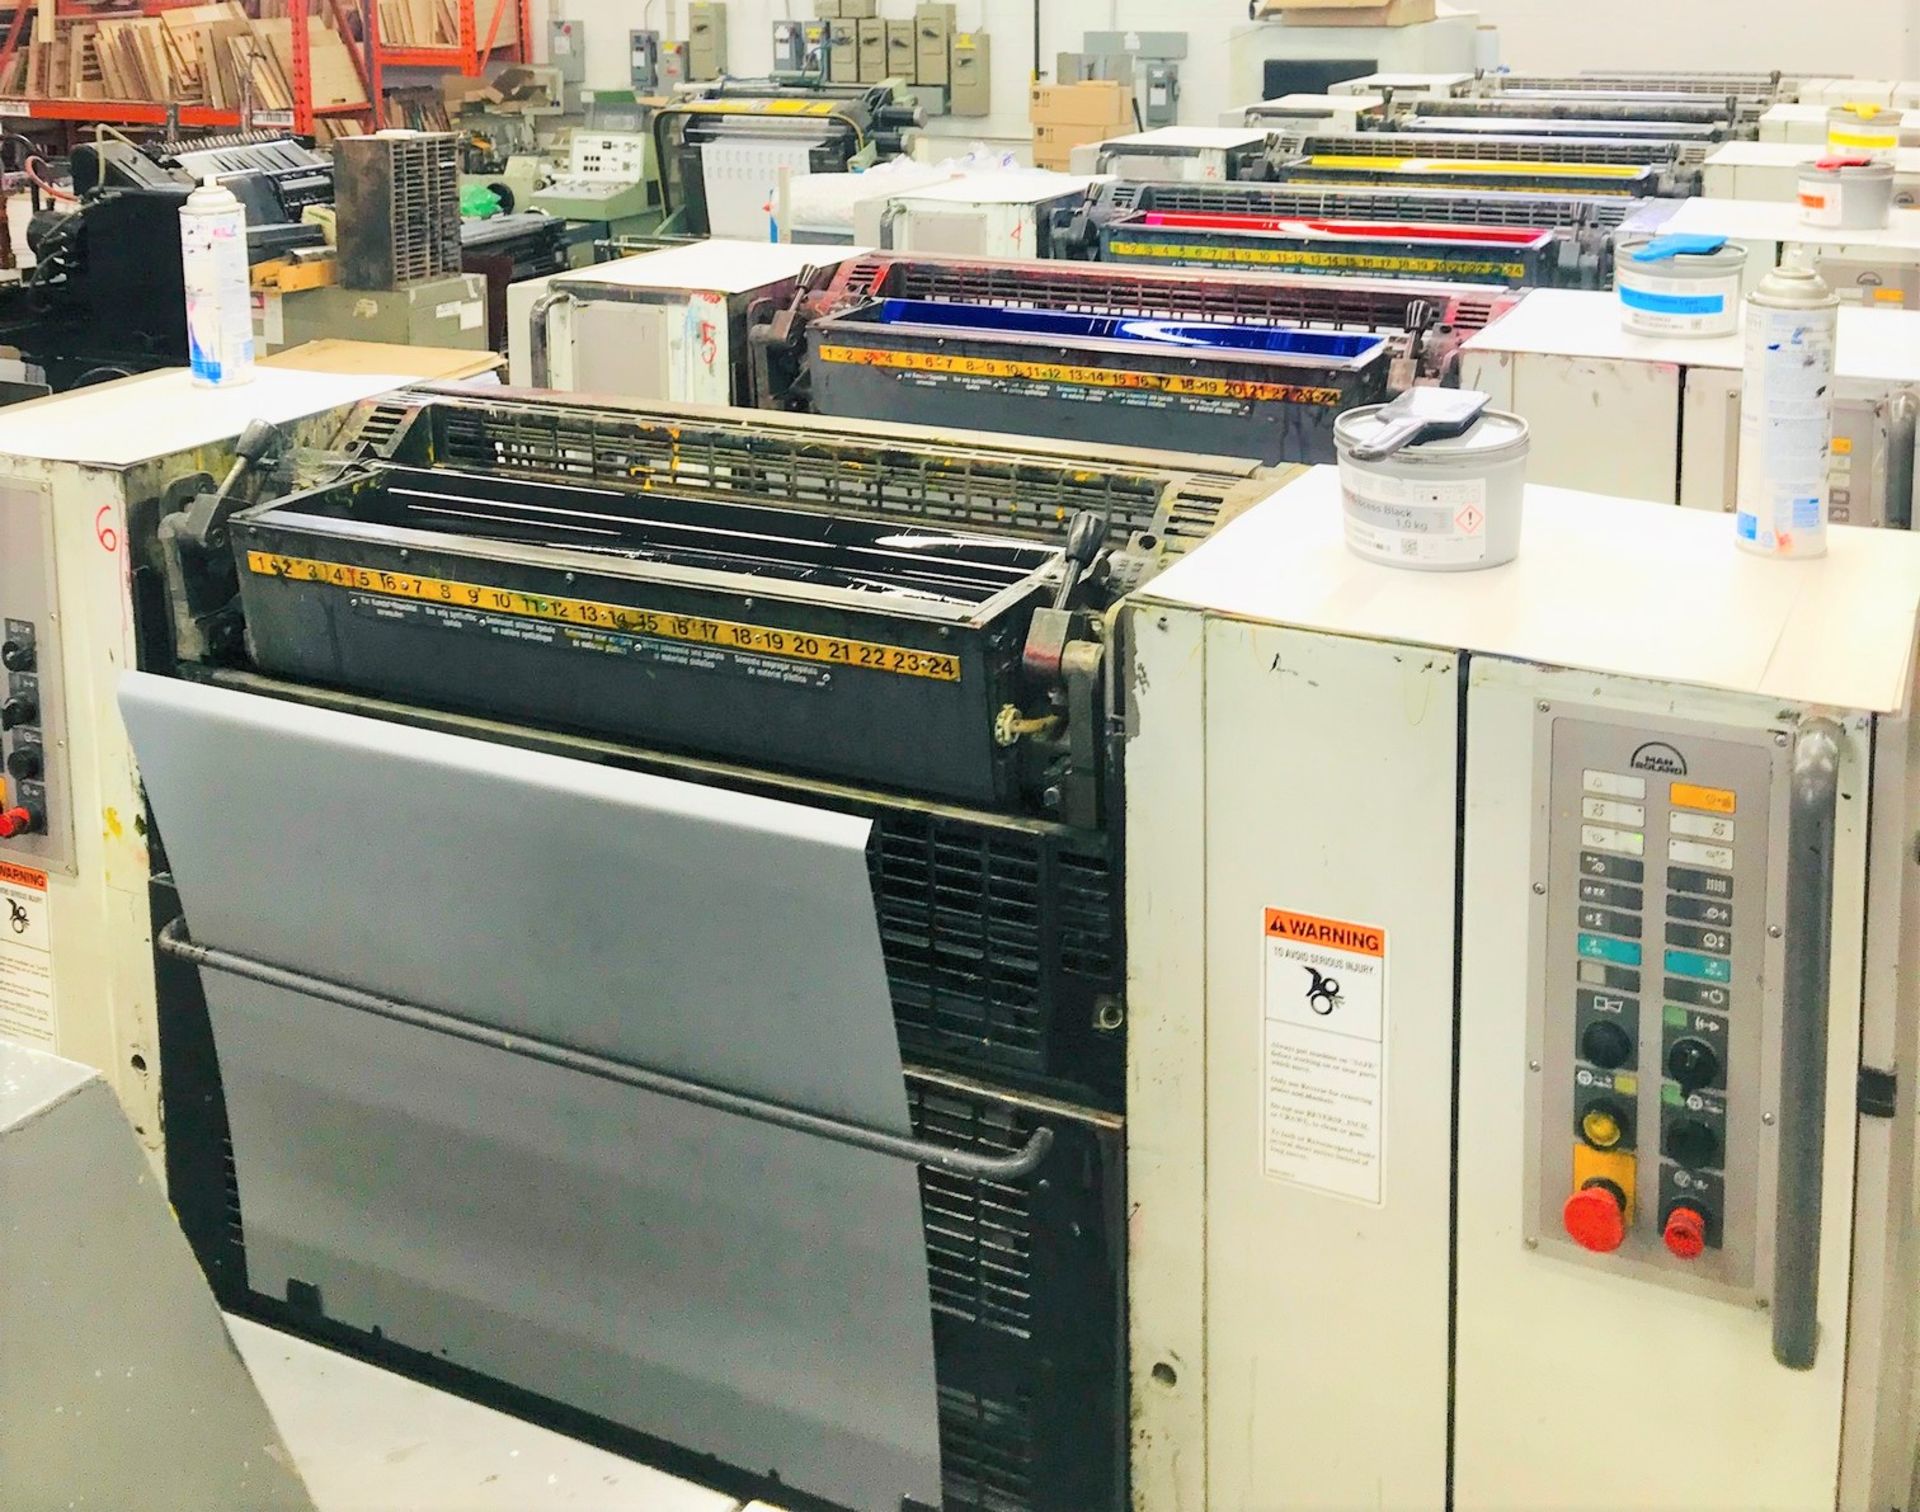 1995 MAN ROLAND 300 6-COLOUR OFFSET PRINTING PRESS, MODEL R306, S/N 25152B, TOTAL SHEET COUNT - Image 4 of 53